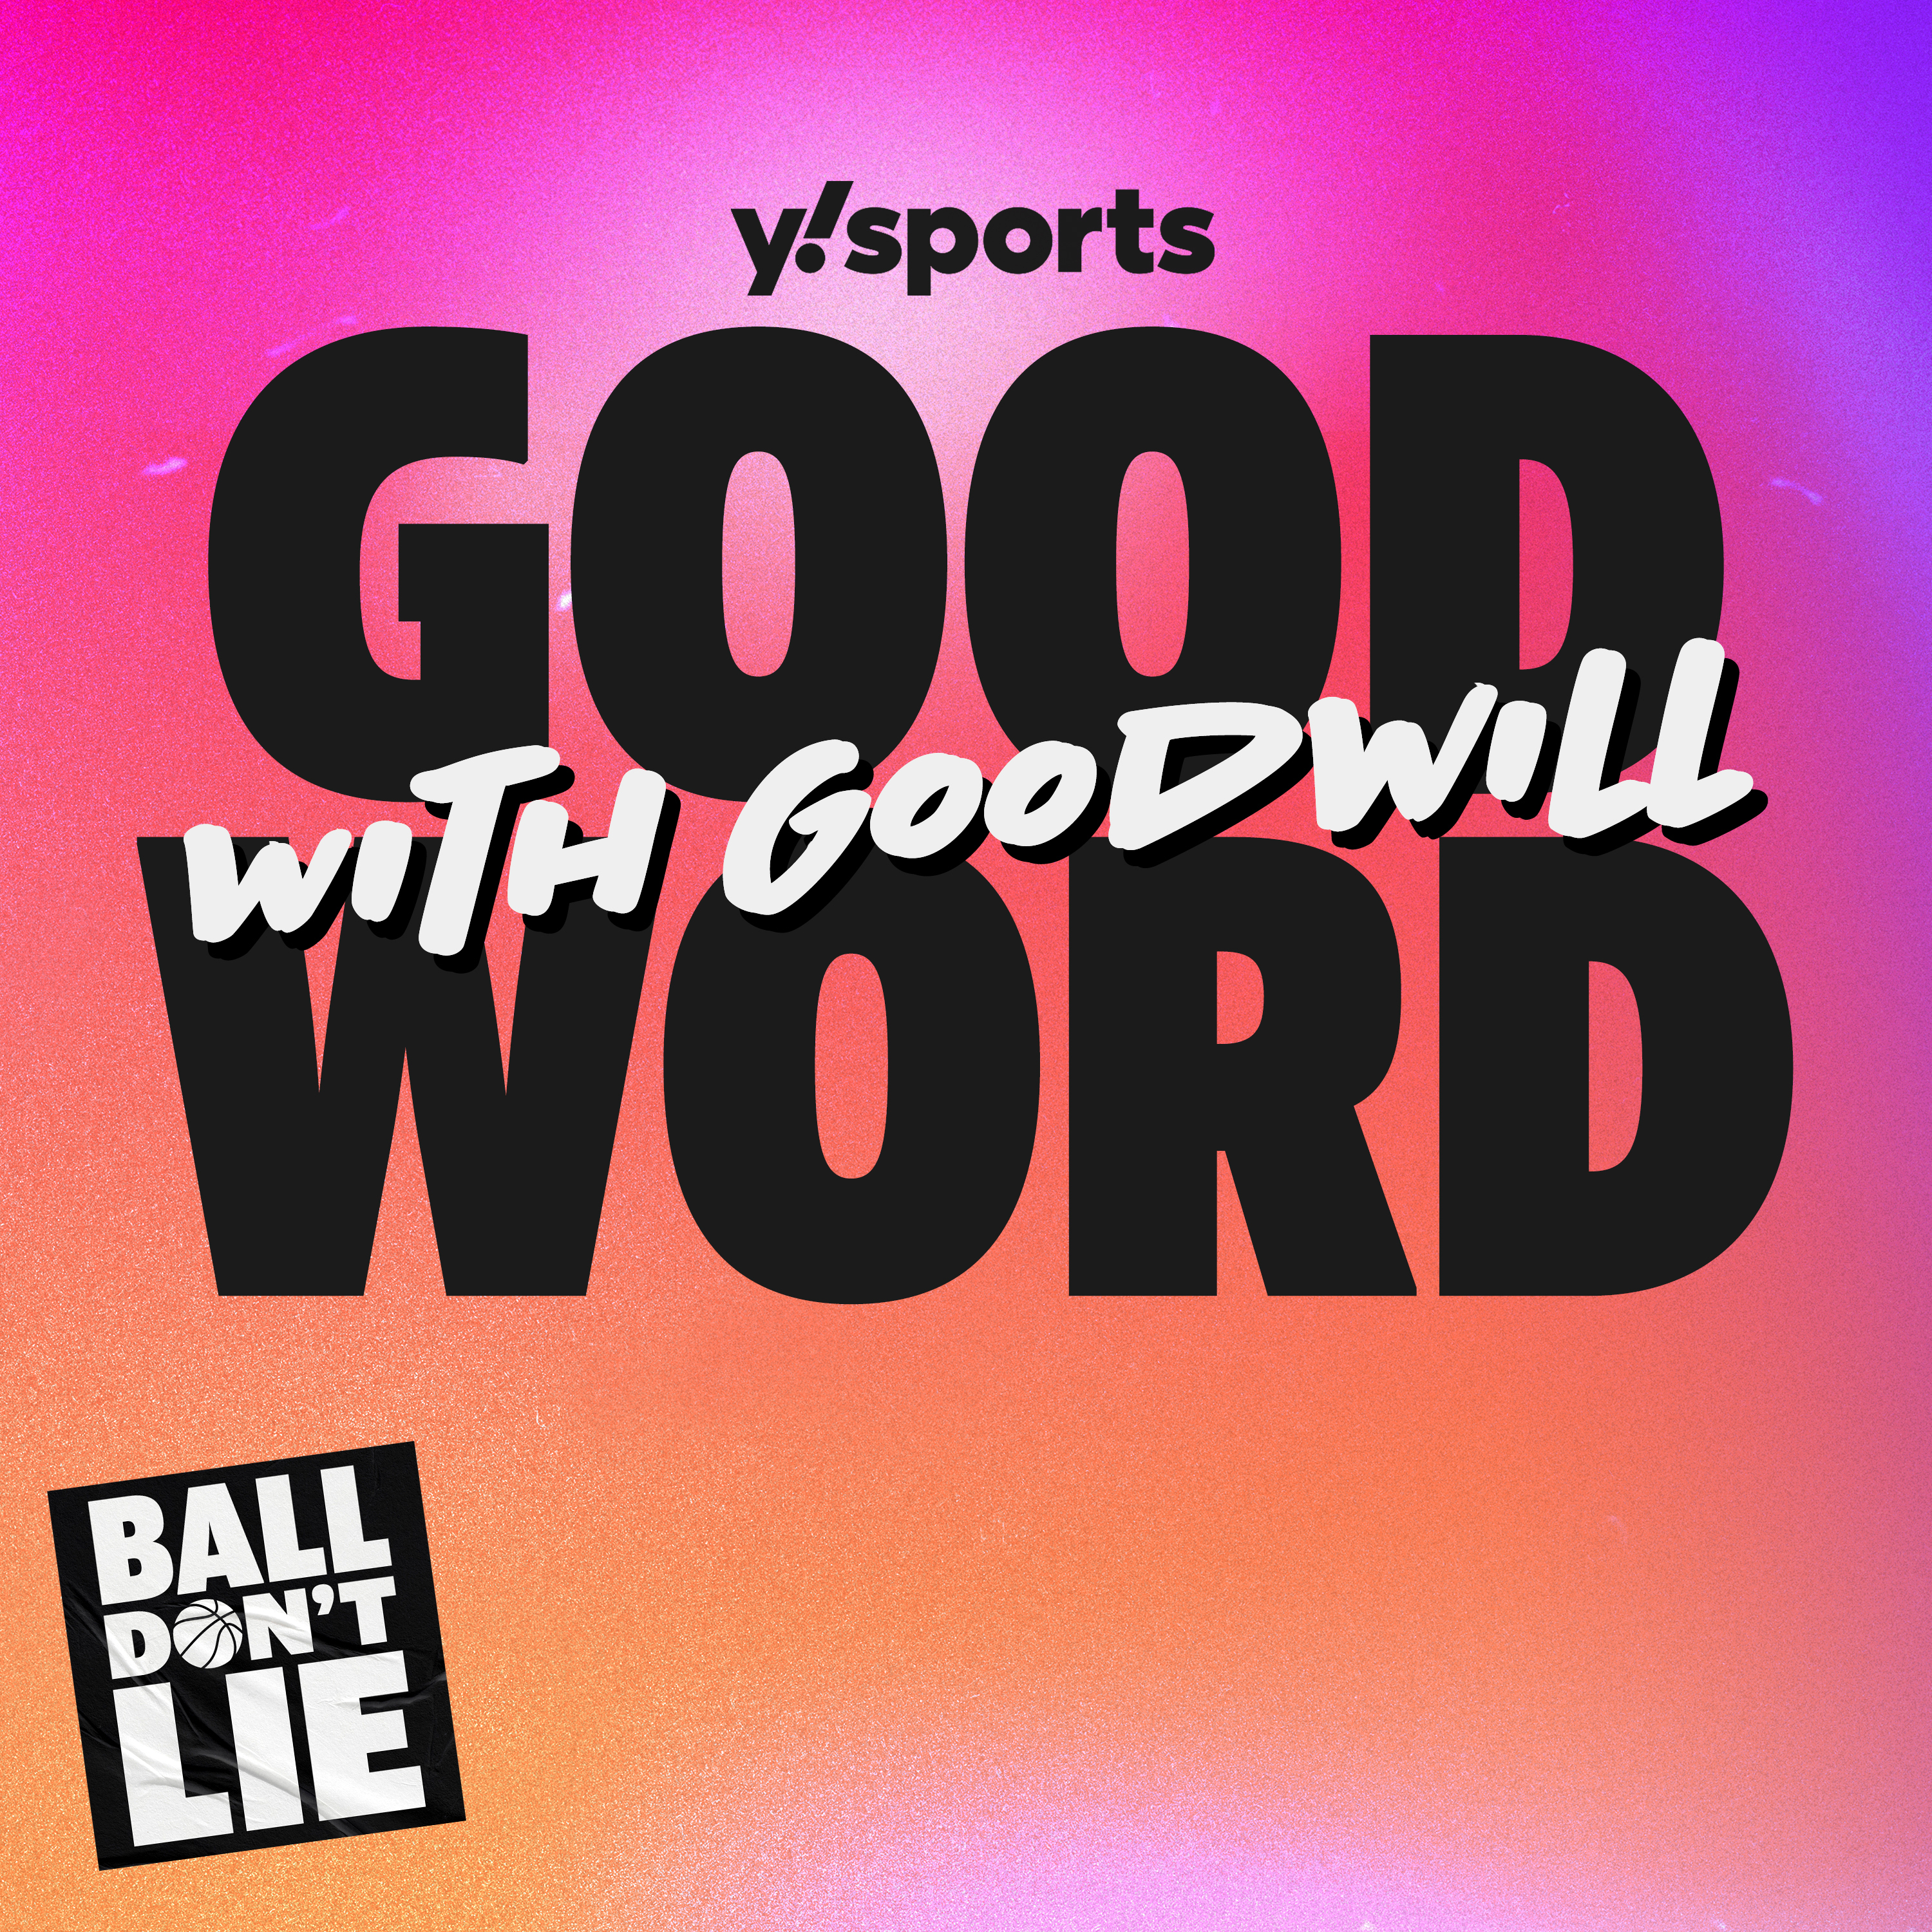 Thunder dominate, Celtics cruise & concerns about Luka & Brunson | Good Word with Goodwill